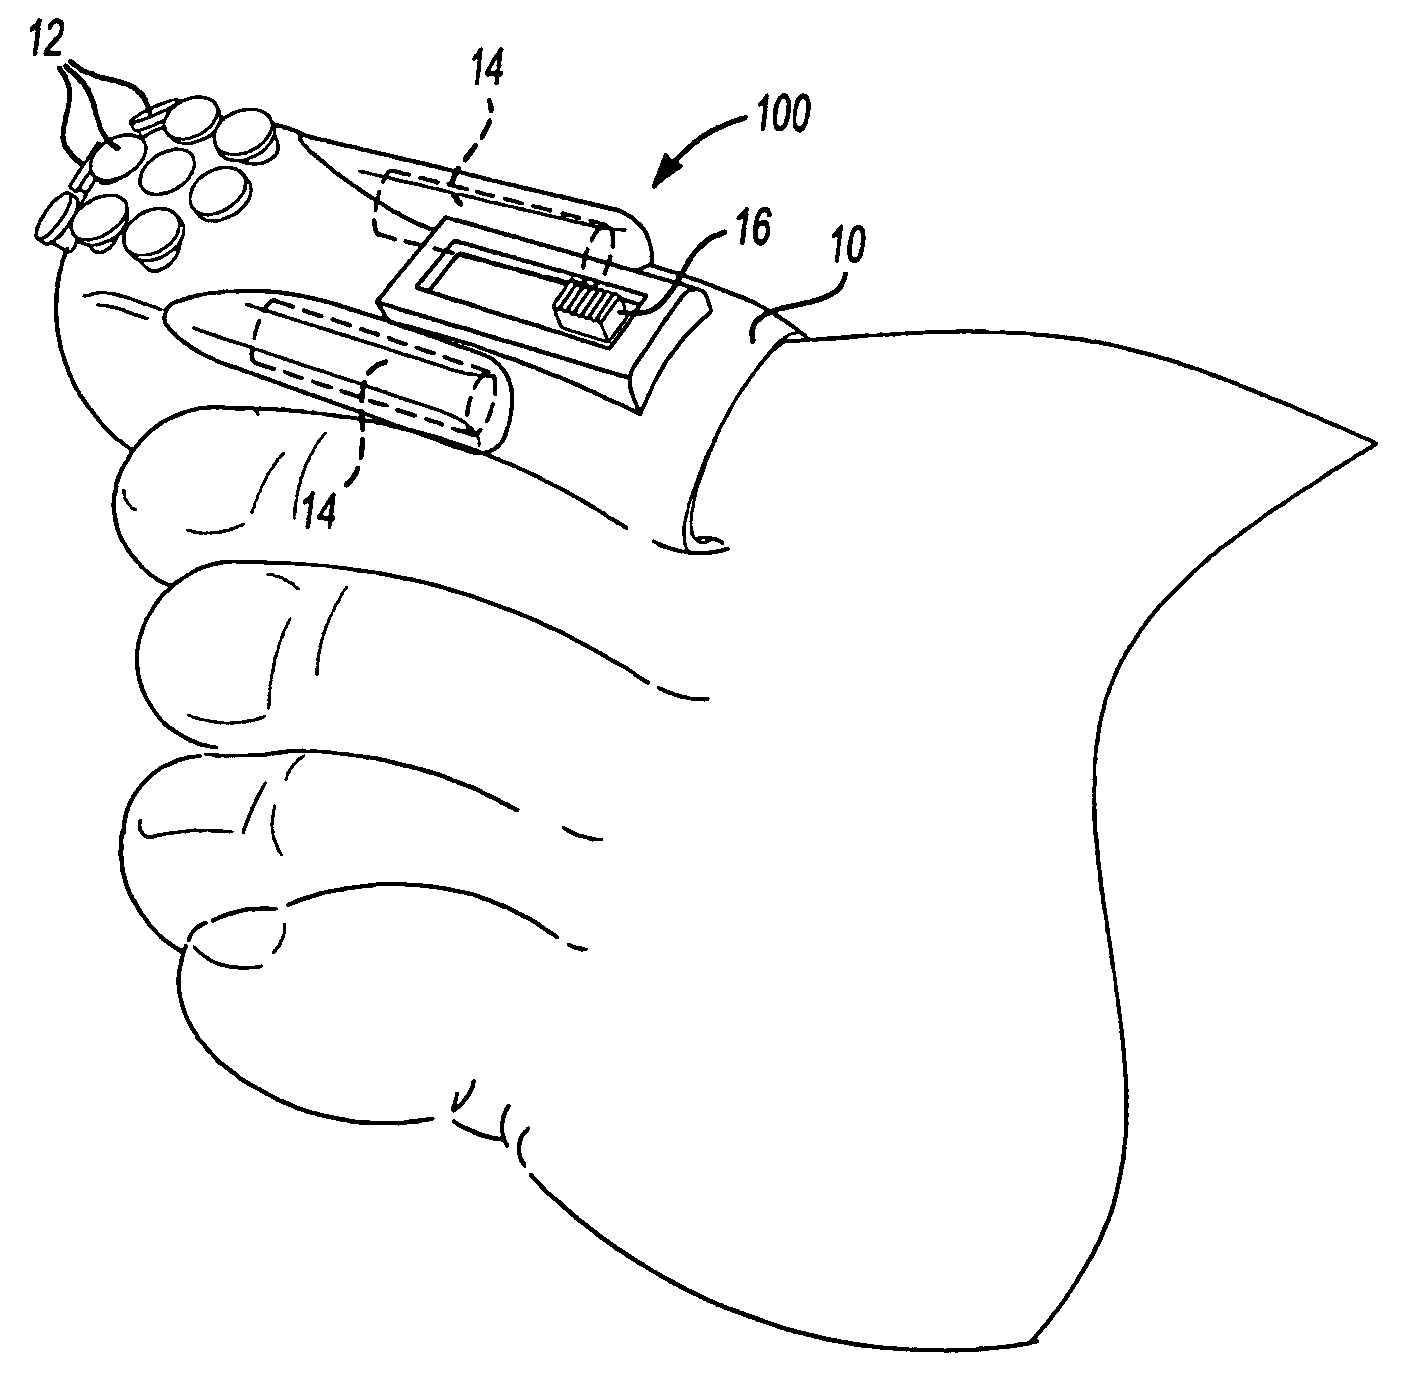 Therapy and device for treatment of nail infections